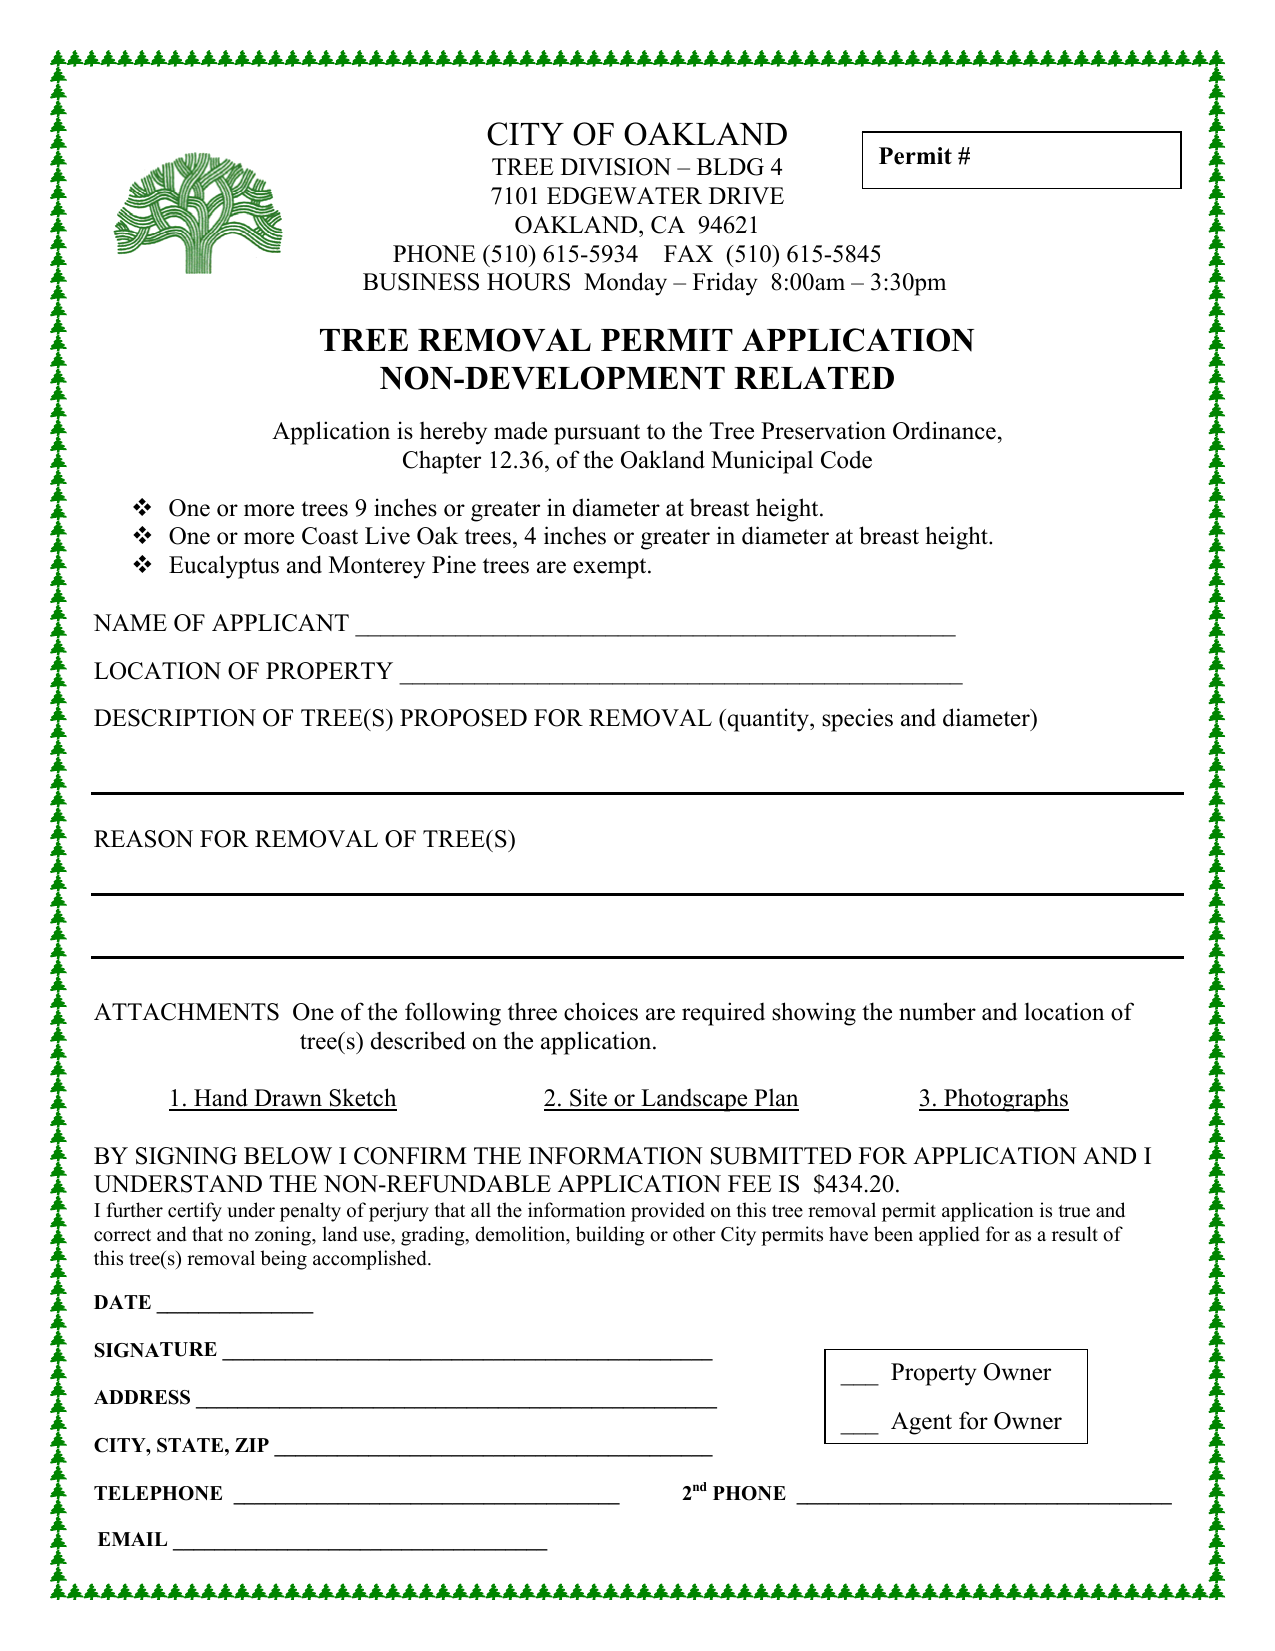 City of oakland tree removal permit